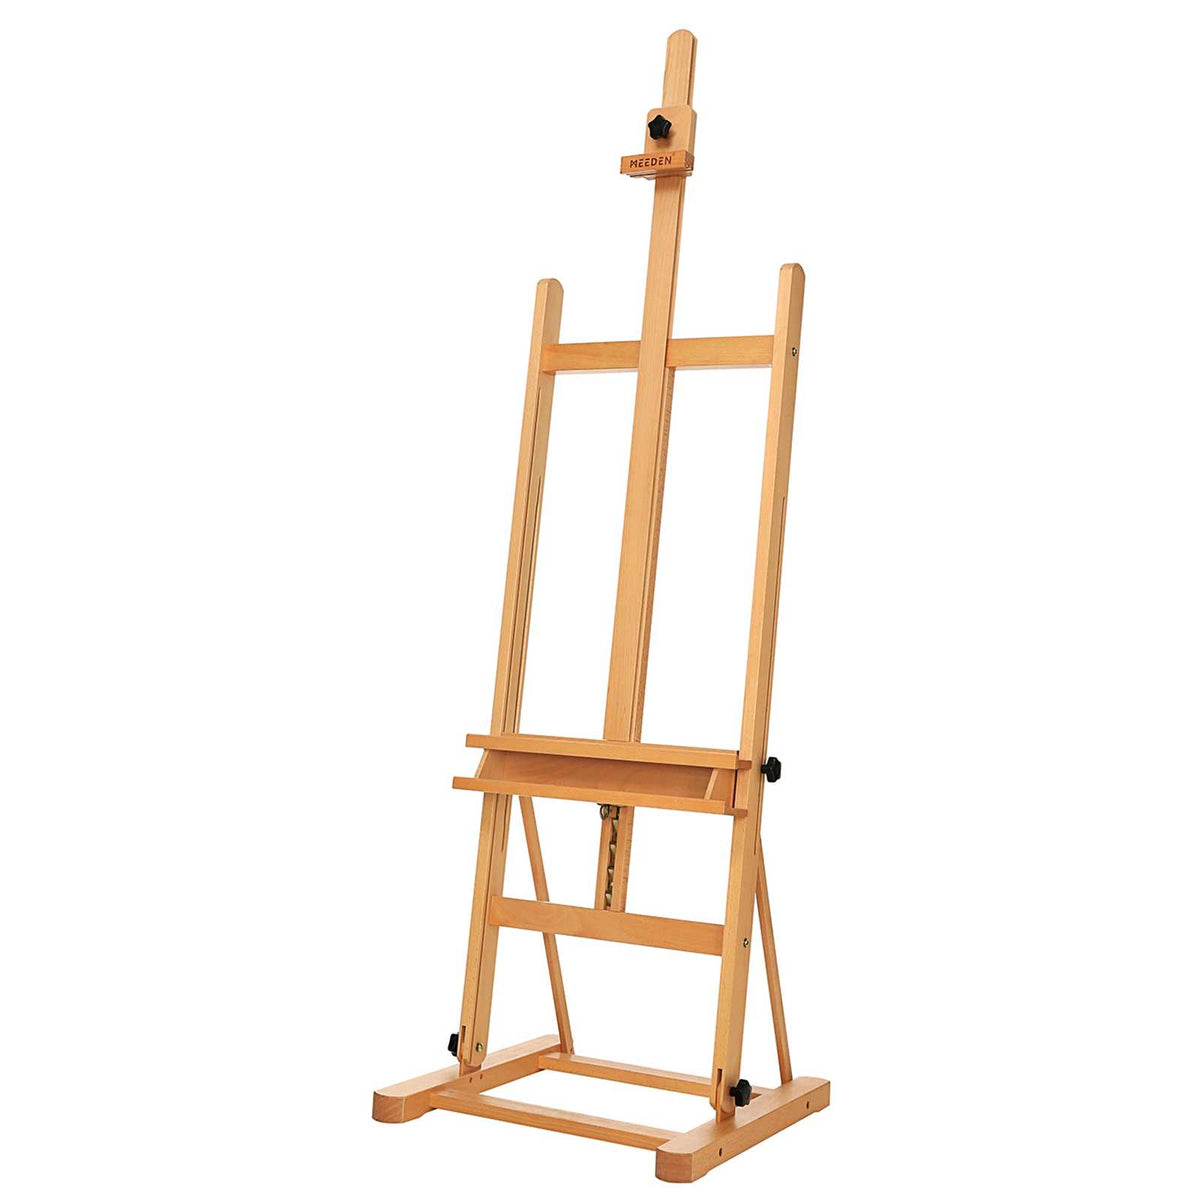 MEEDEN Artist Large Adjustable Wooden Easel Stand for Painting, 54.7‘’ Height